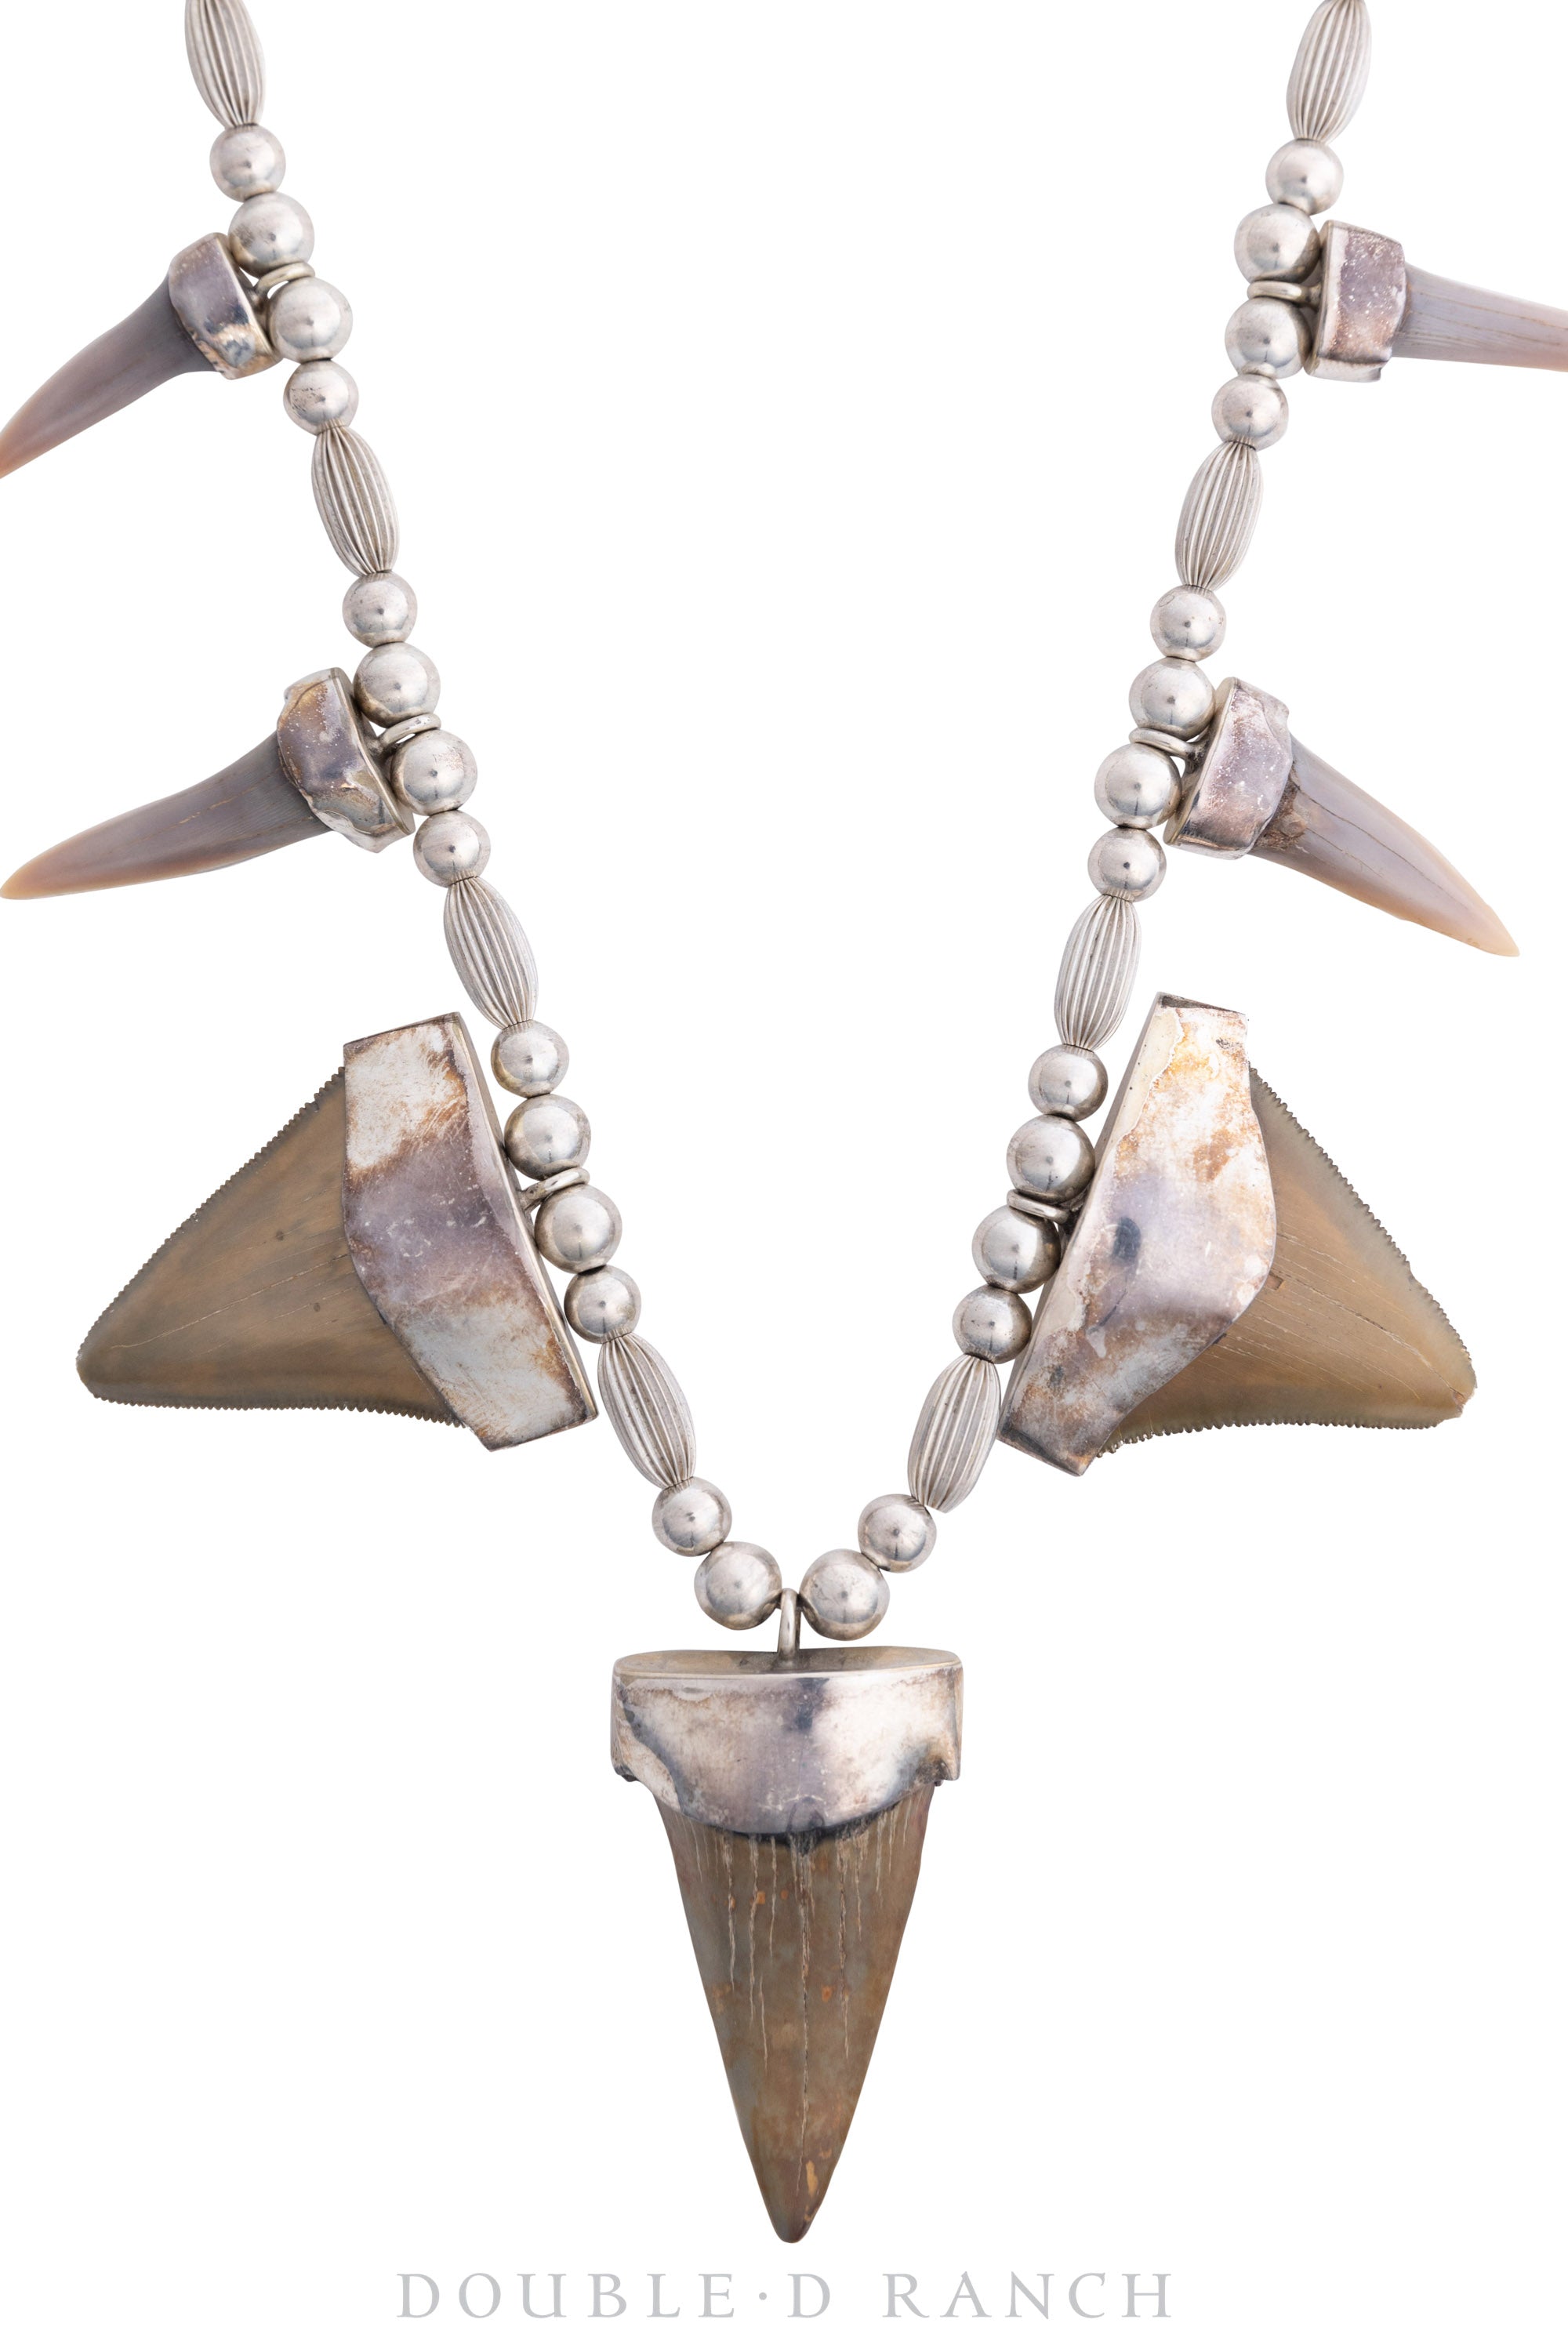 Necklace, Novelty, Fossilized Shark Teeth With Desert Pearls, Vintage, Estate, 1988